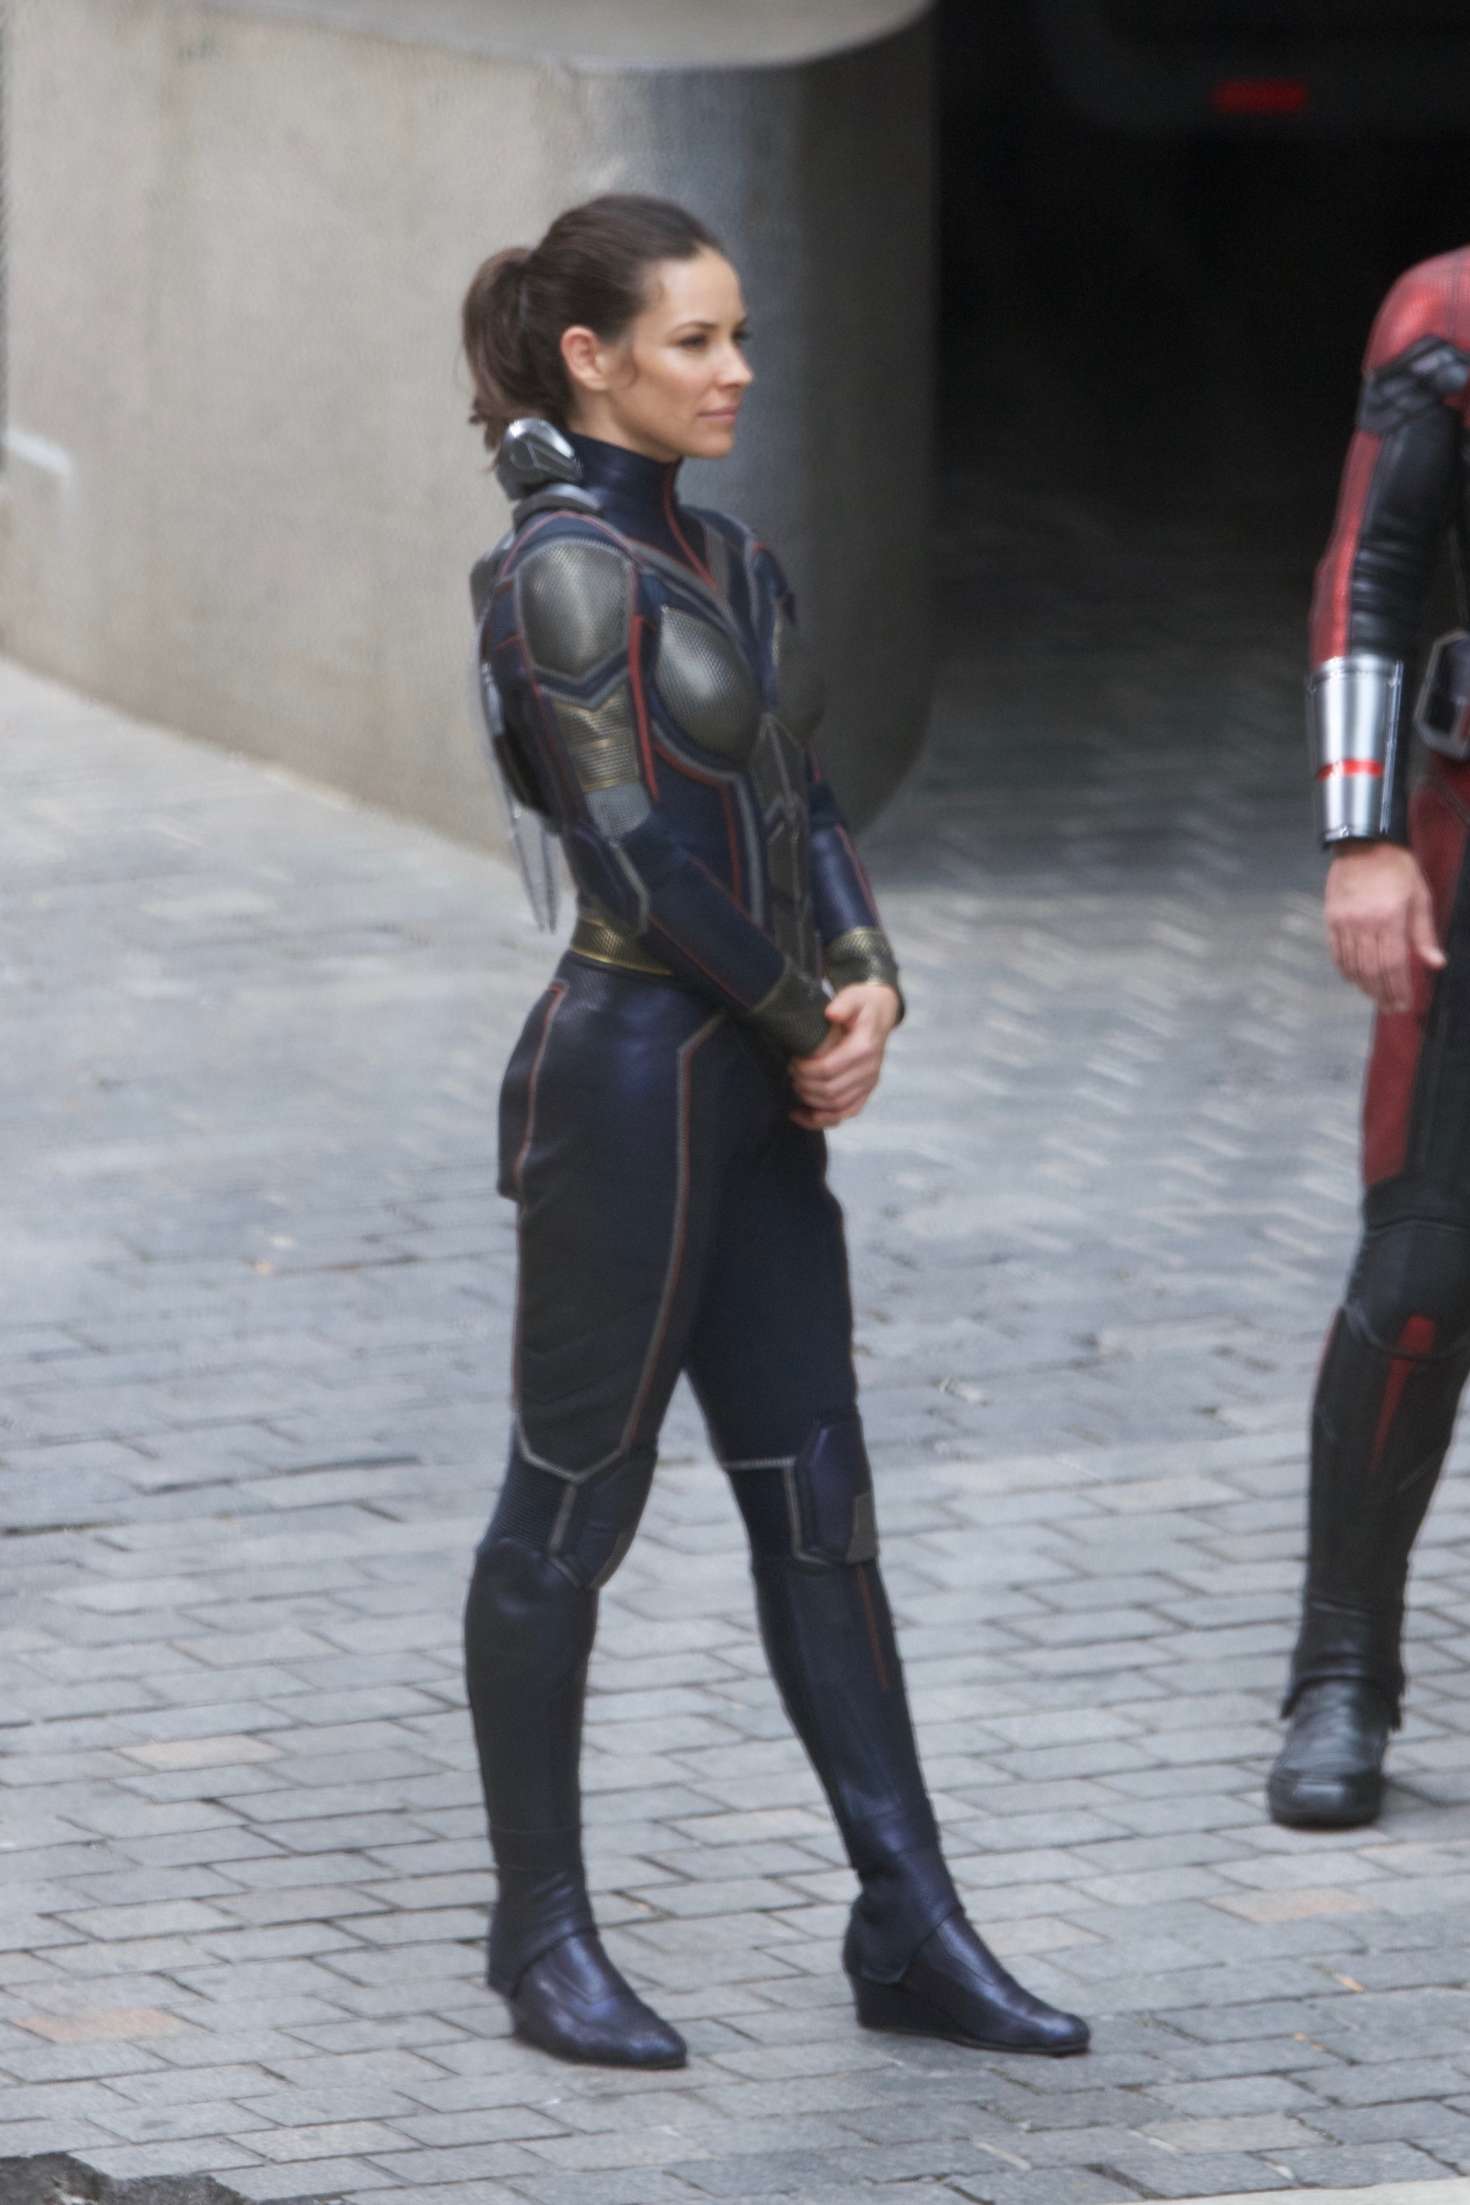 Evangeline Lilly and Paul Rudd – Filming a scene for Ant-Man and The Wasp  -04 – GotCeleb